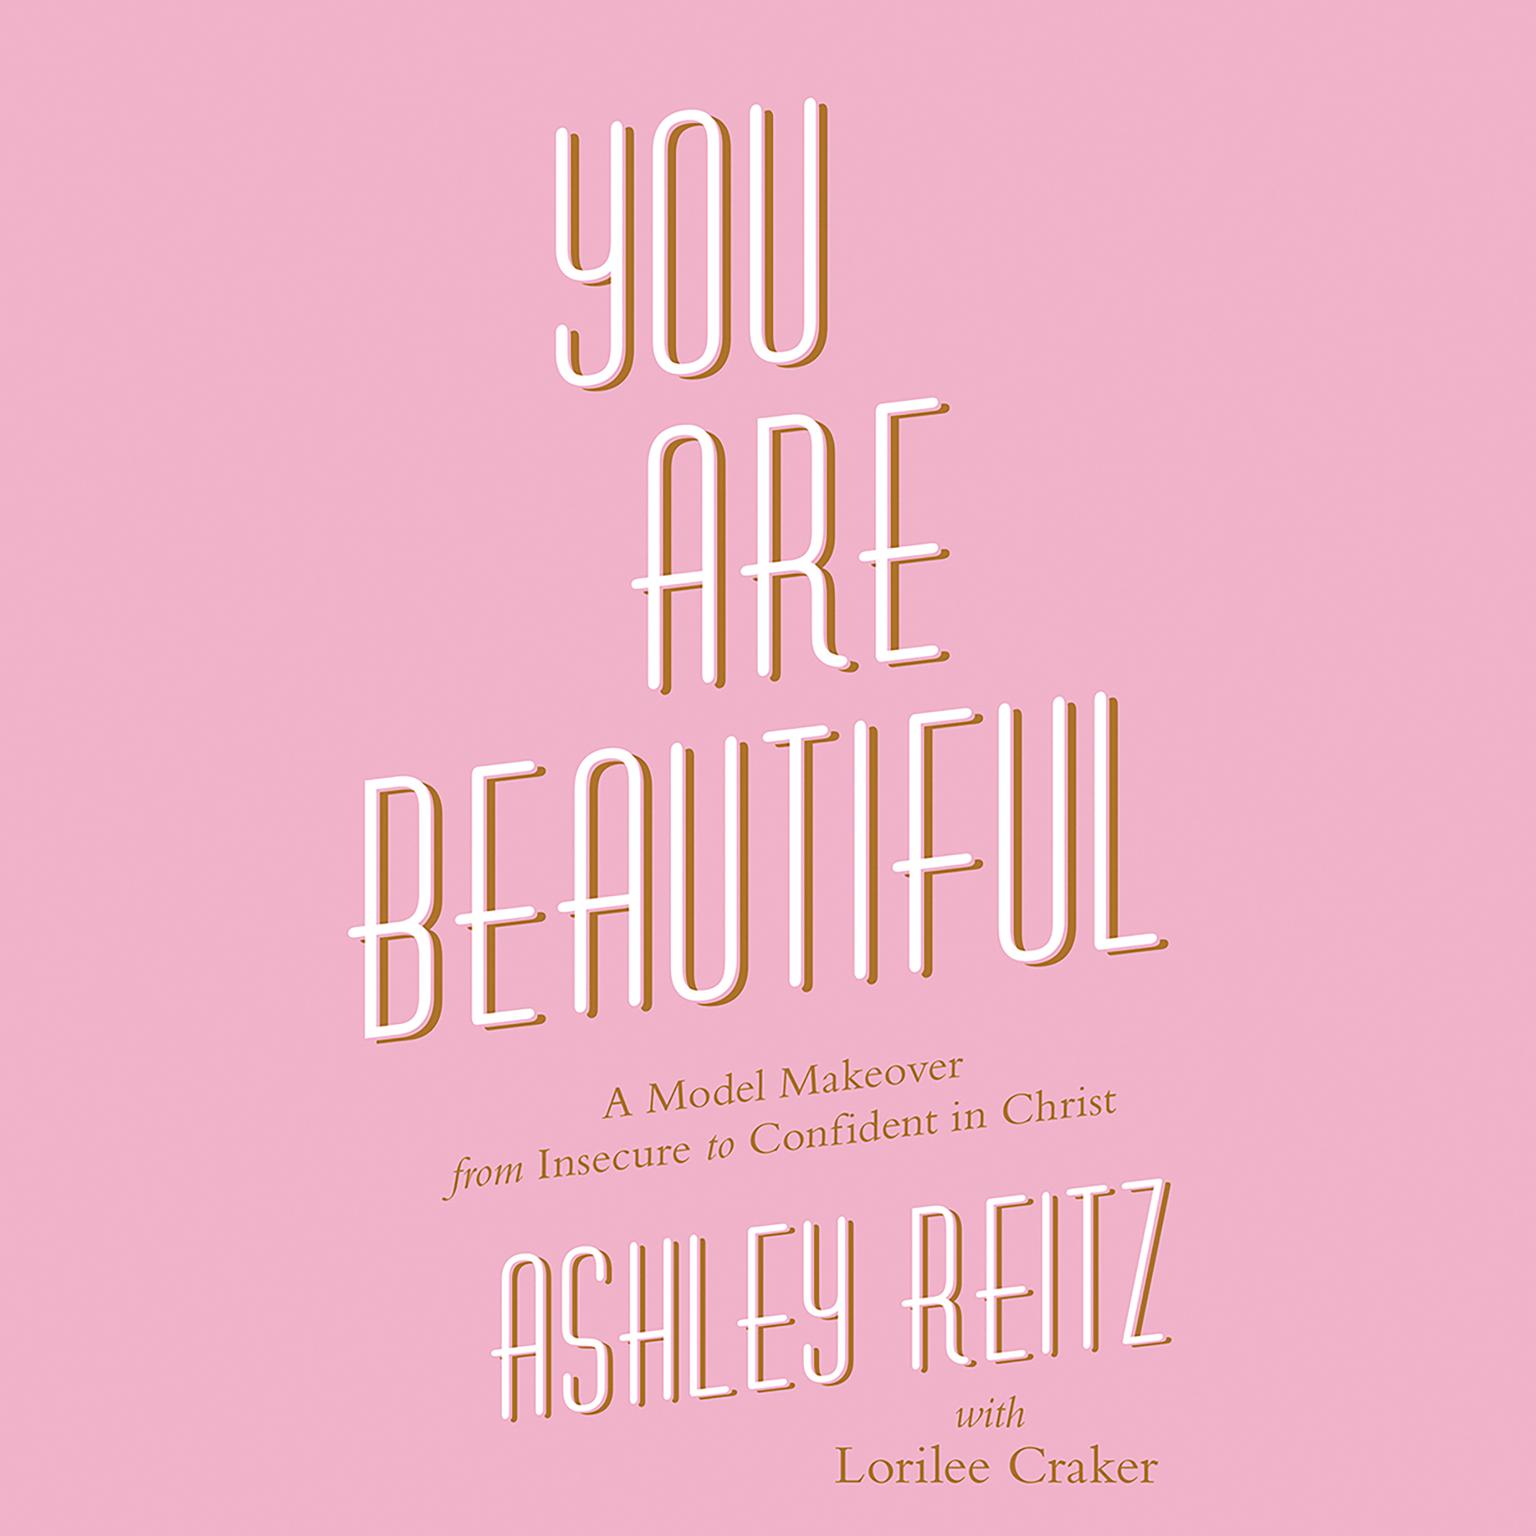 You Are Beautiful: A Model Makeover from Insecure to Confident in Christ Audiobook, by Ashley Reitz